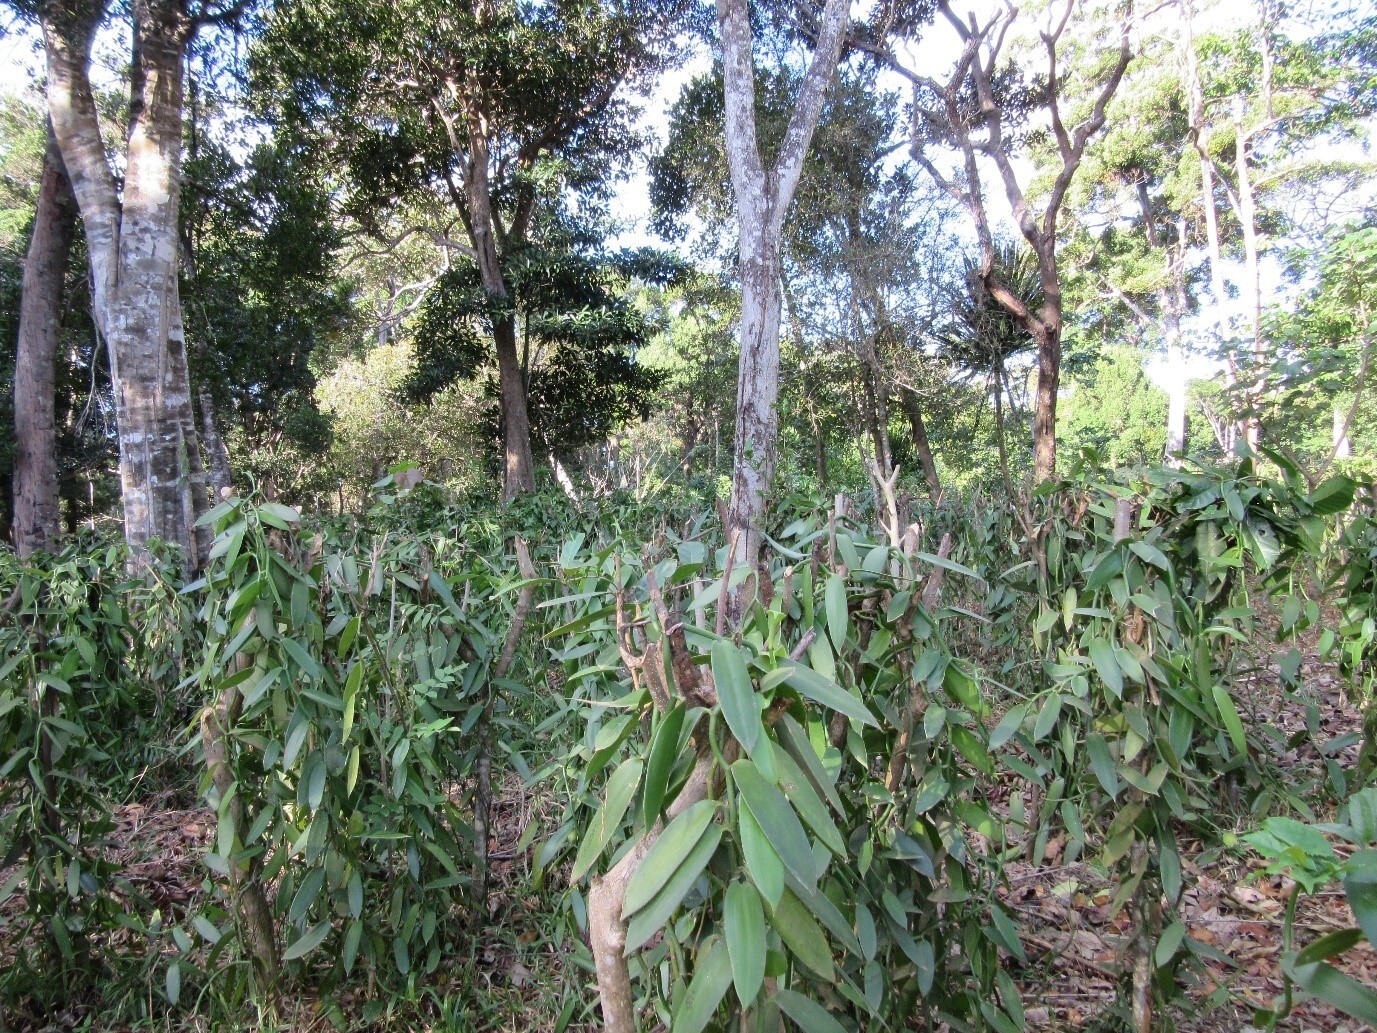 Vanilla orchid is suspended from other plants (foreground) and growing under the canopy (background) of this former forest area. Unlike vanilla agroforests, which are established on open fallow land, this cultivation leads to a loss of endemic species and ecosystem functions.